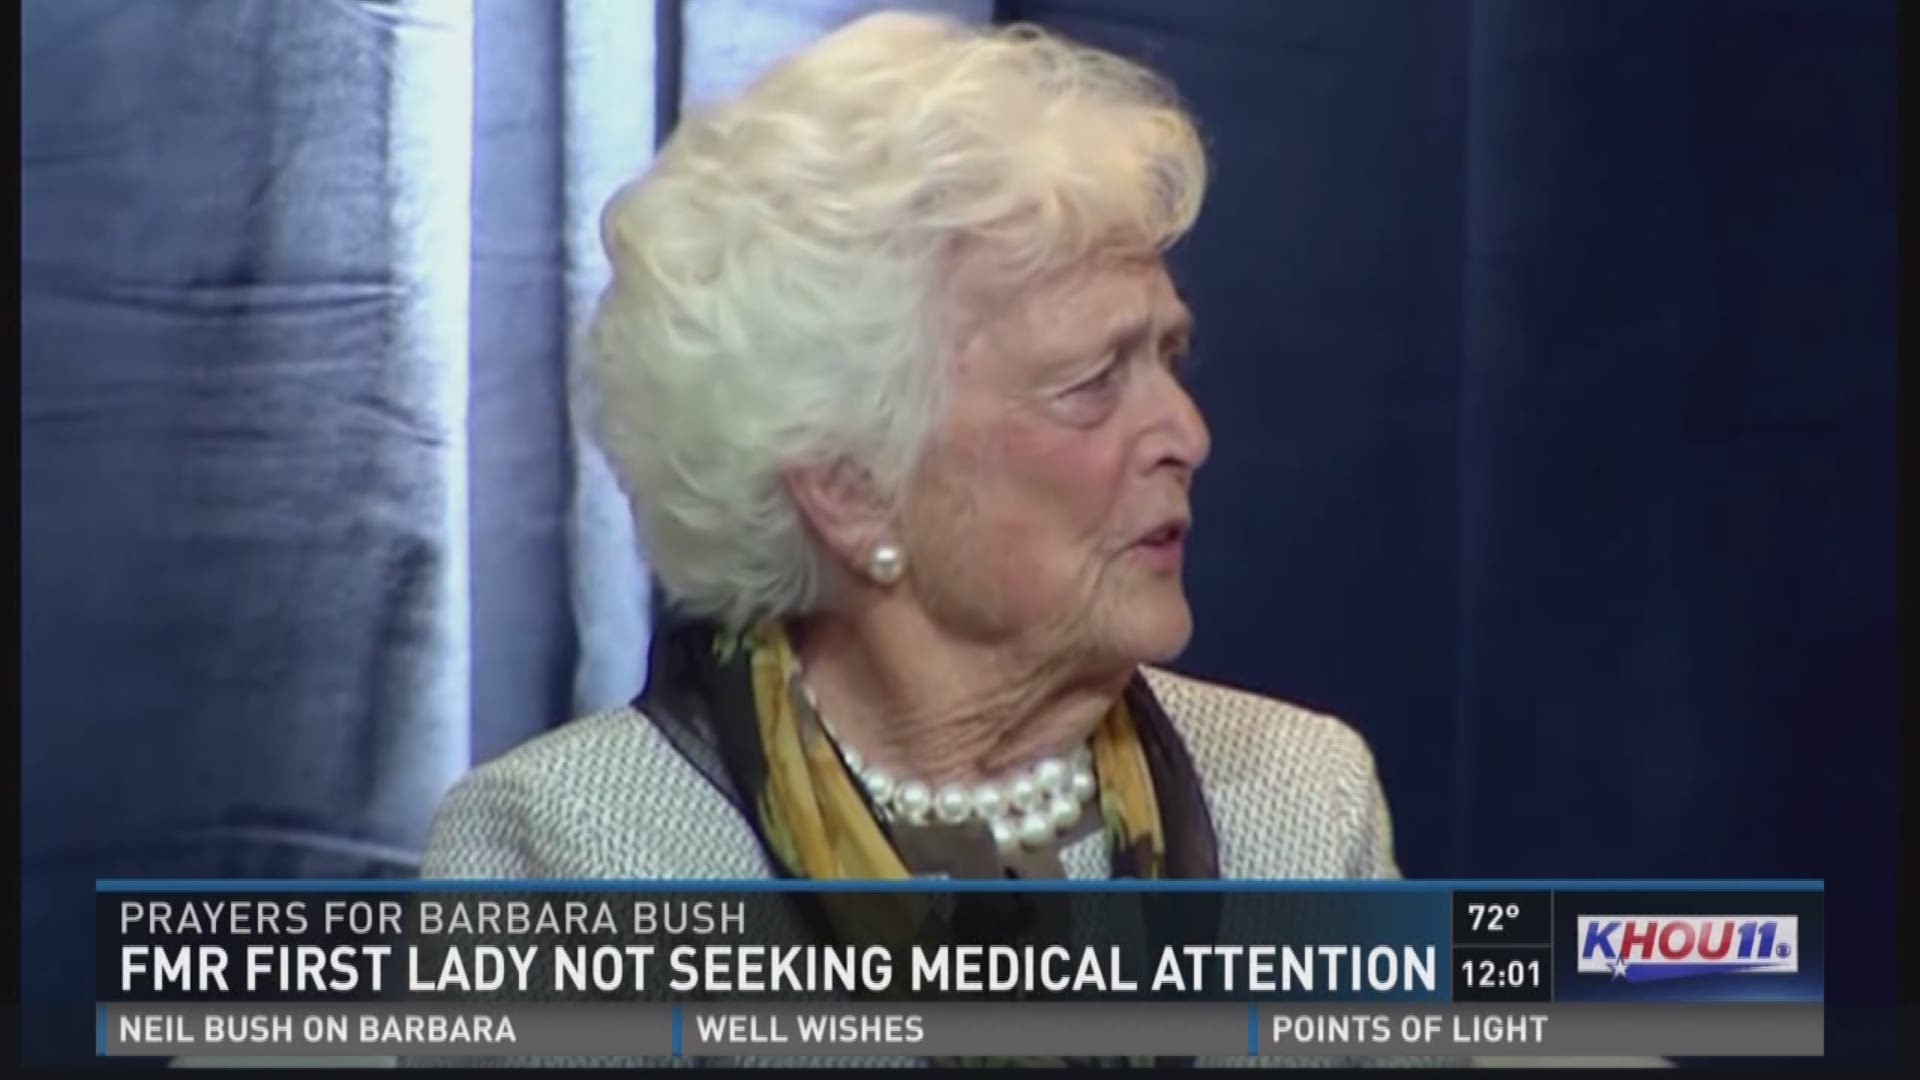 Former First Lady Barbara Bush, the wife and mother of two presidents, has decided to end medical treatment for a life-threatening illness. Here is the latest update on her condition Monday afternoon.